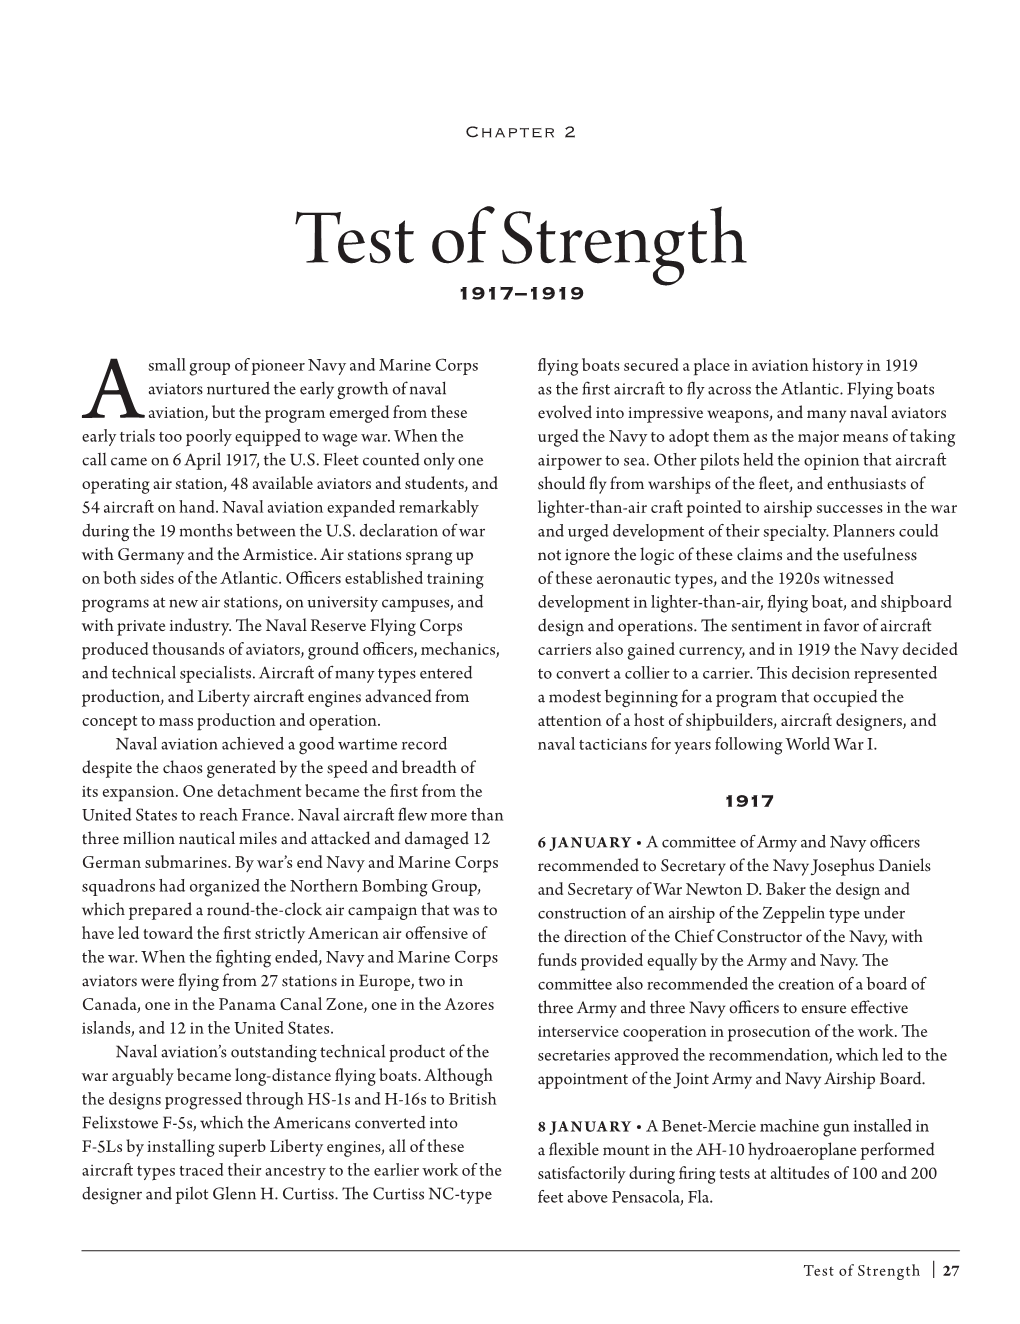 Chapter 2: Test of Strength 1917–1919